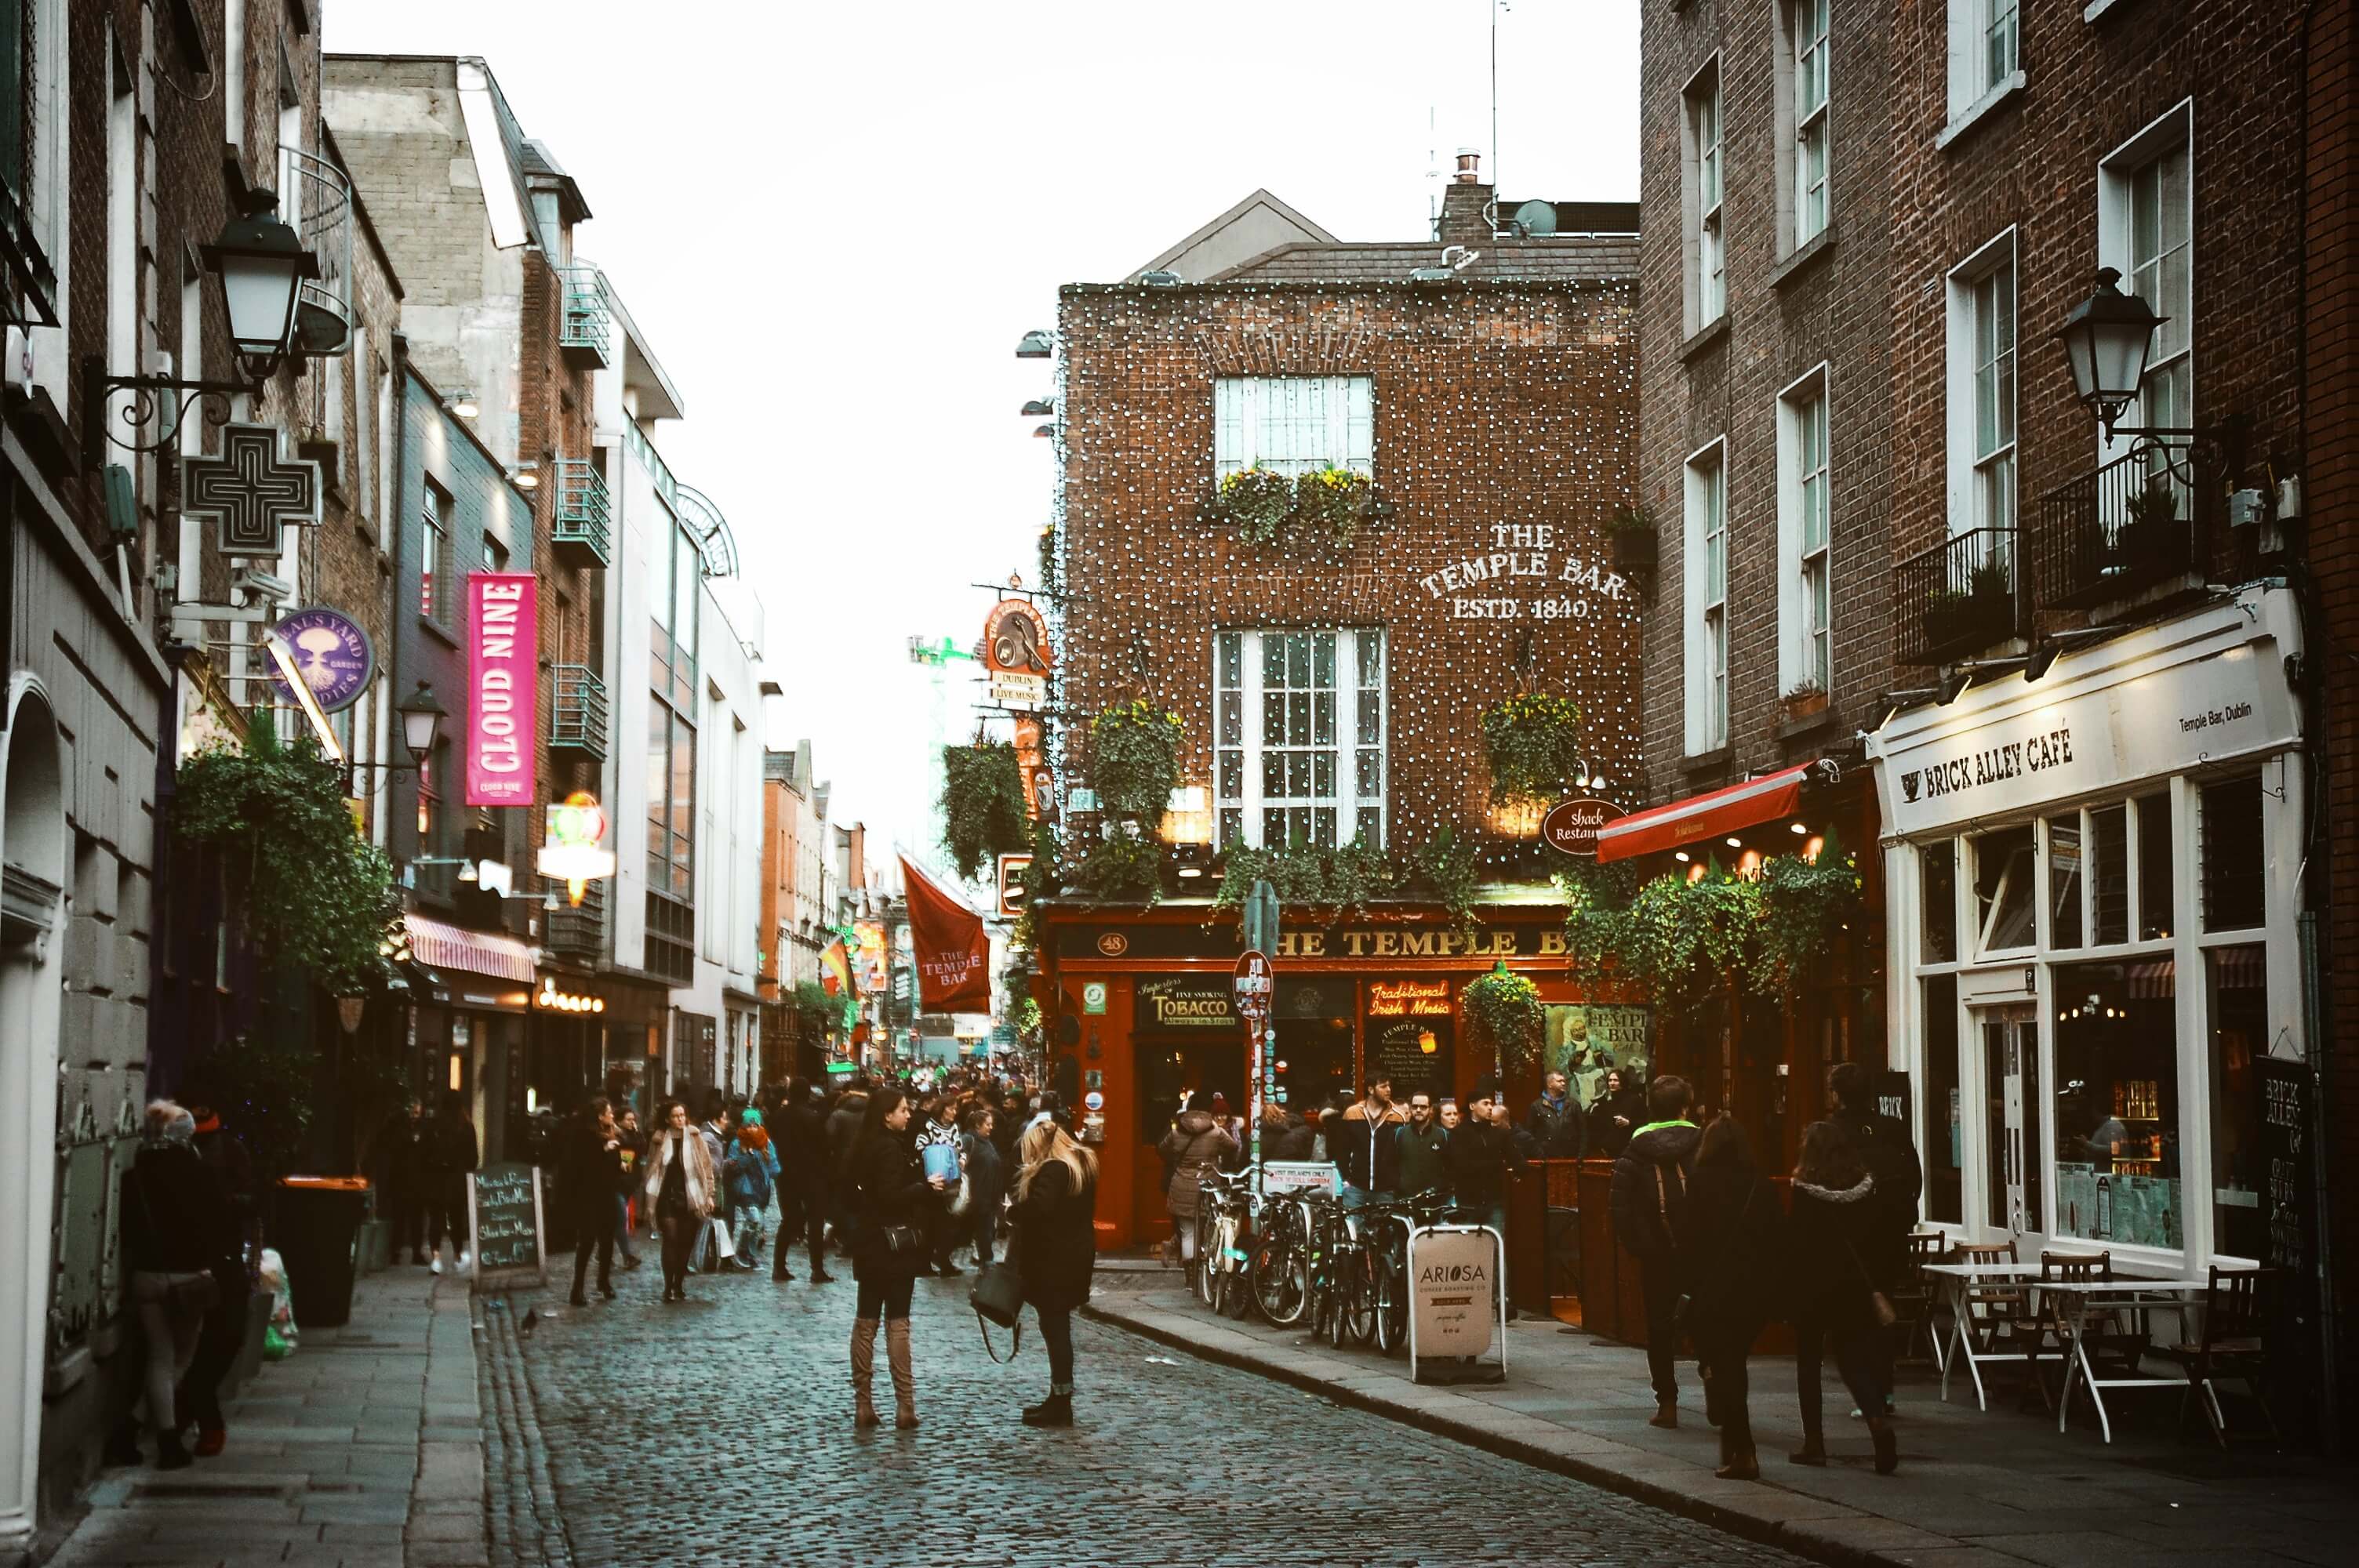 7 Myths About the Irish Culture